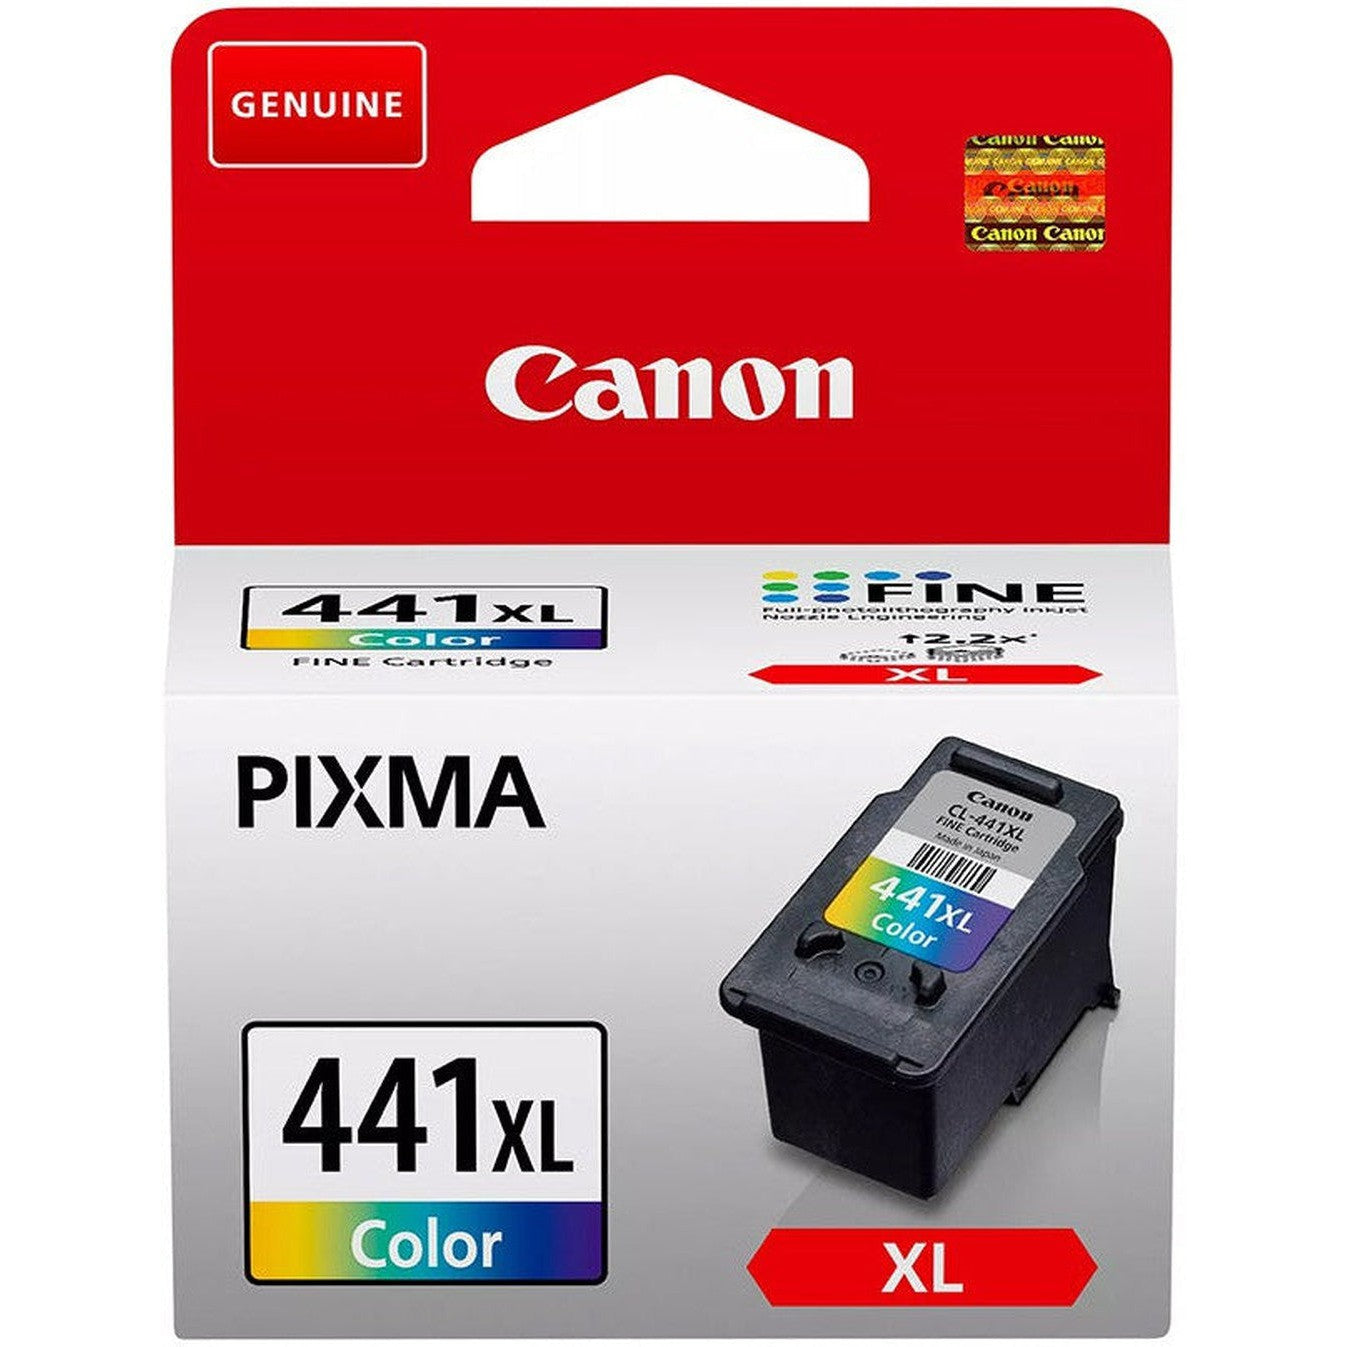 Canon Cl 441 Xl High Yield C/M/Y Colour Ink Cartridge-Inks And Toners-Canon-Star Light Kuwait